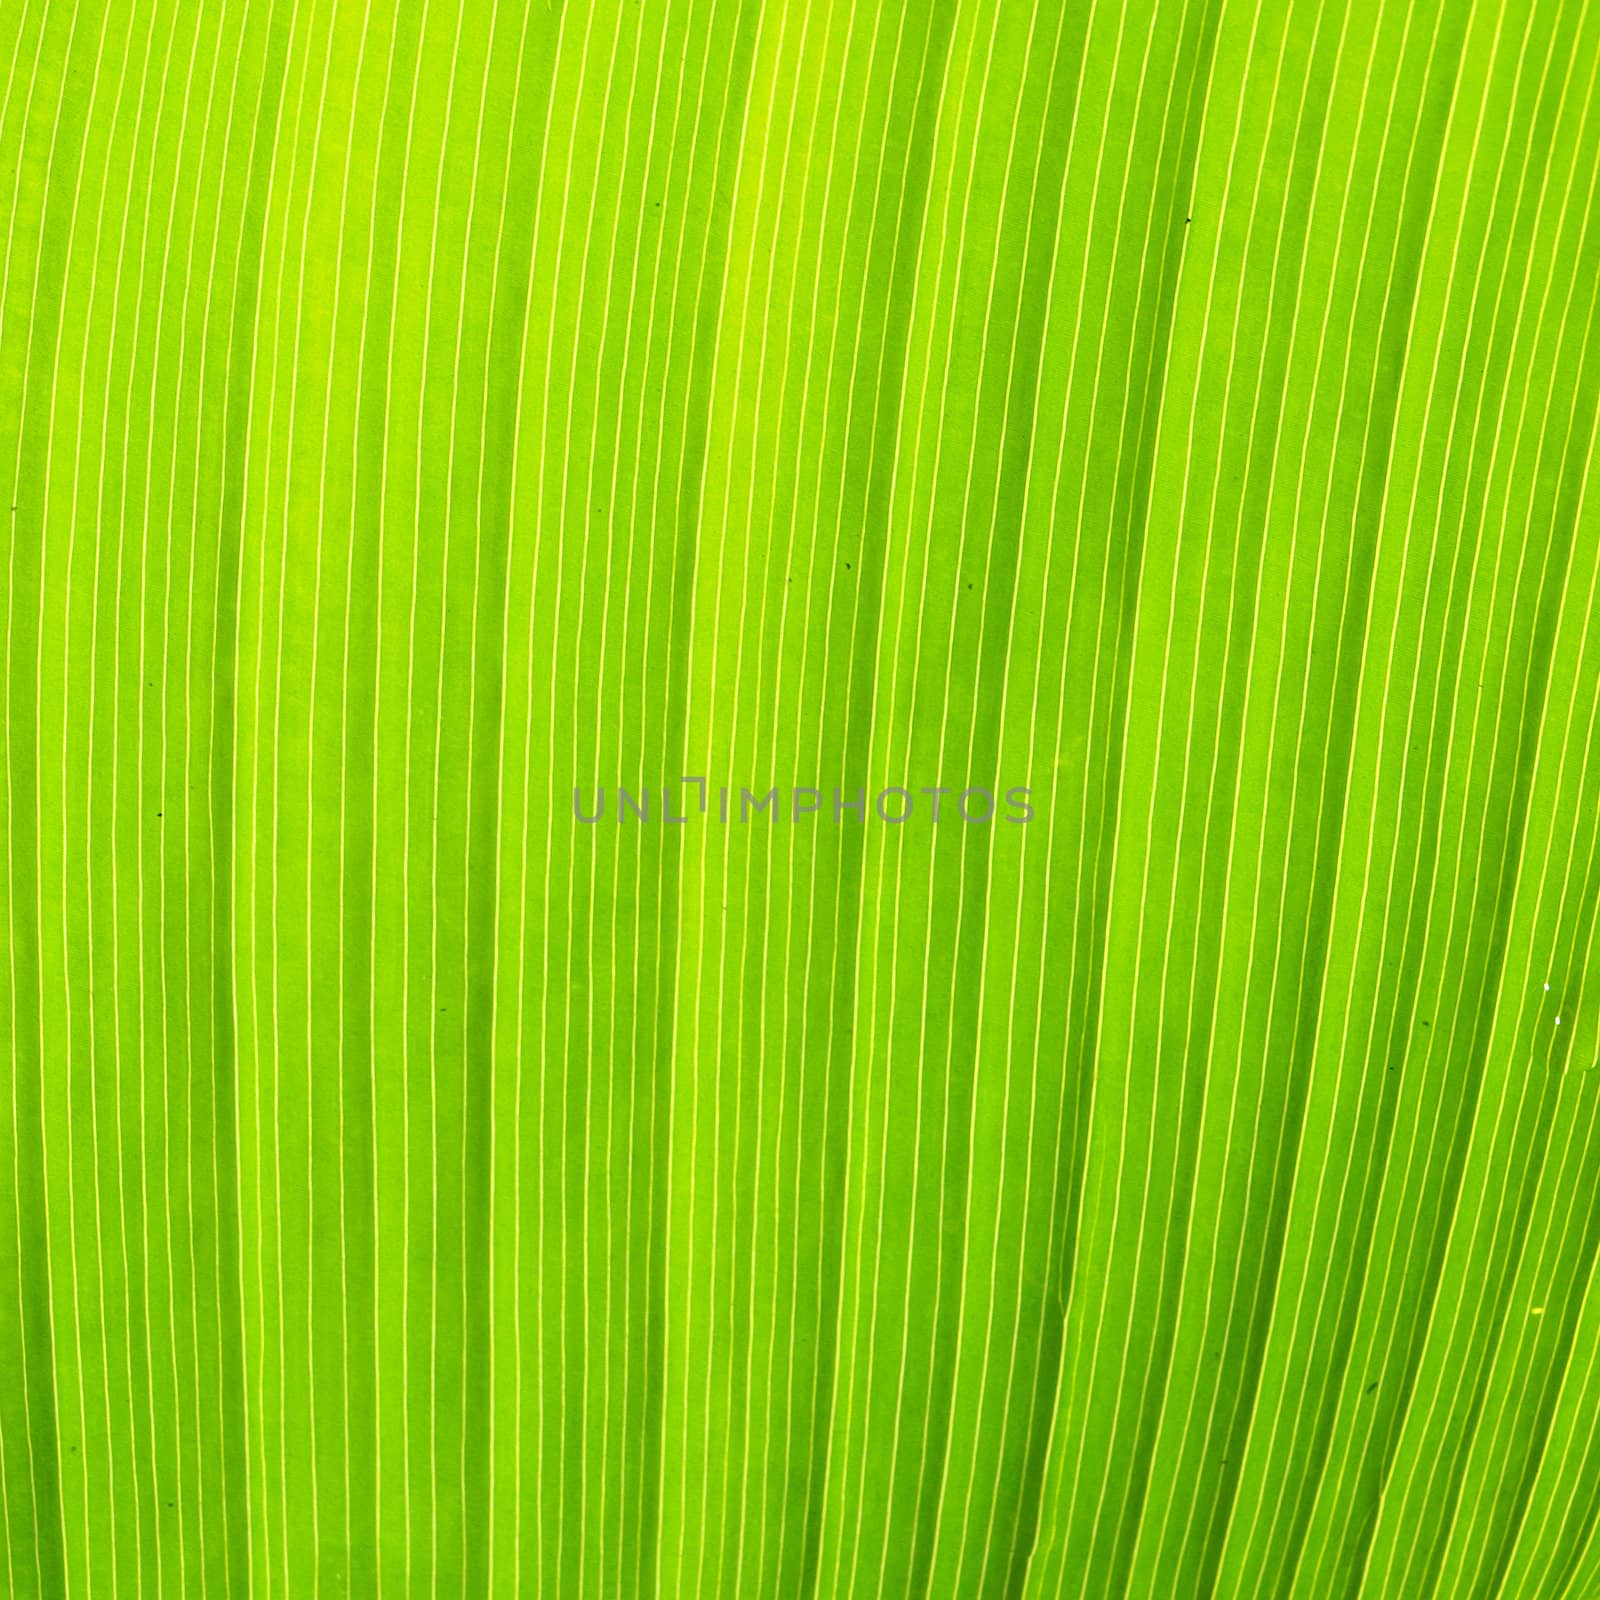 Texture and detail of Banana Leaf by jakgree